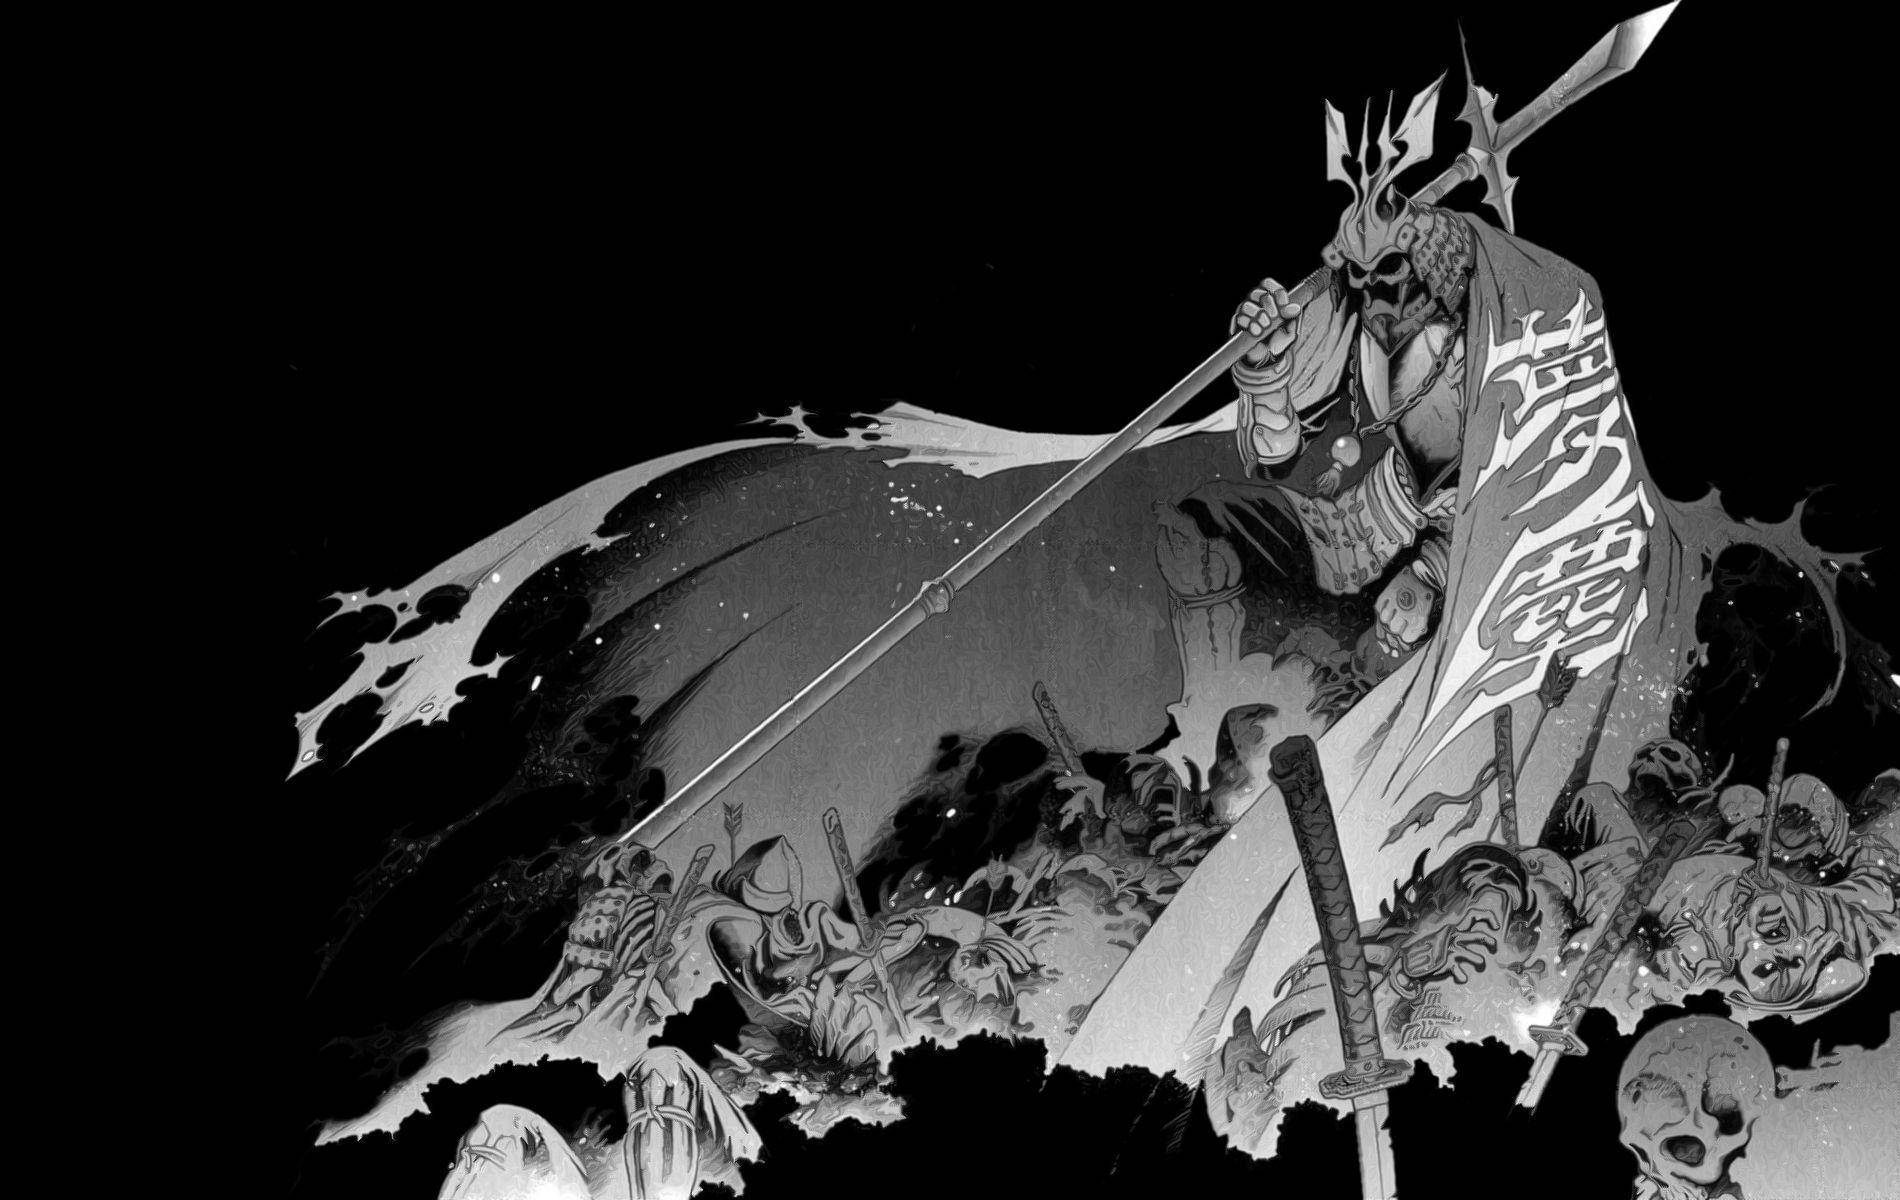 A samurai stands atop a rooftop, sword drawn and ready to fight. Wallpaper